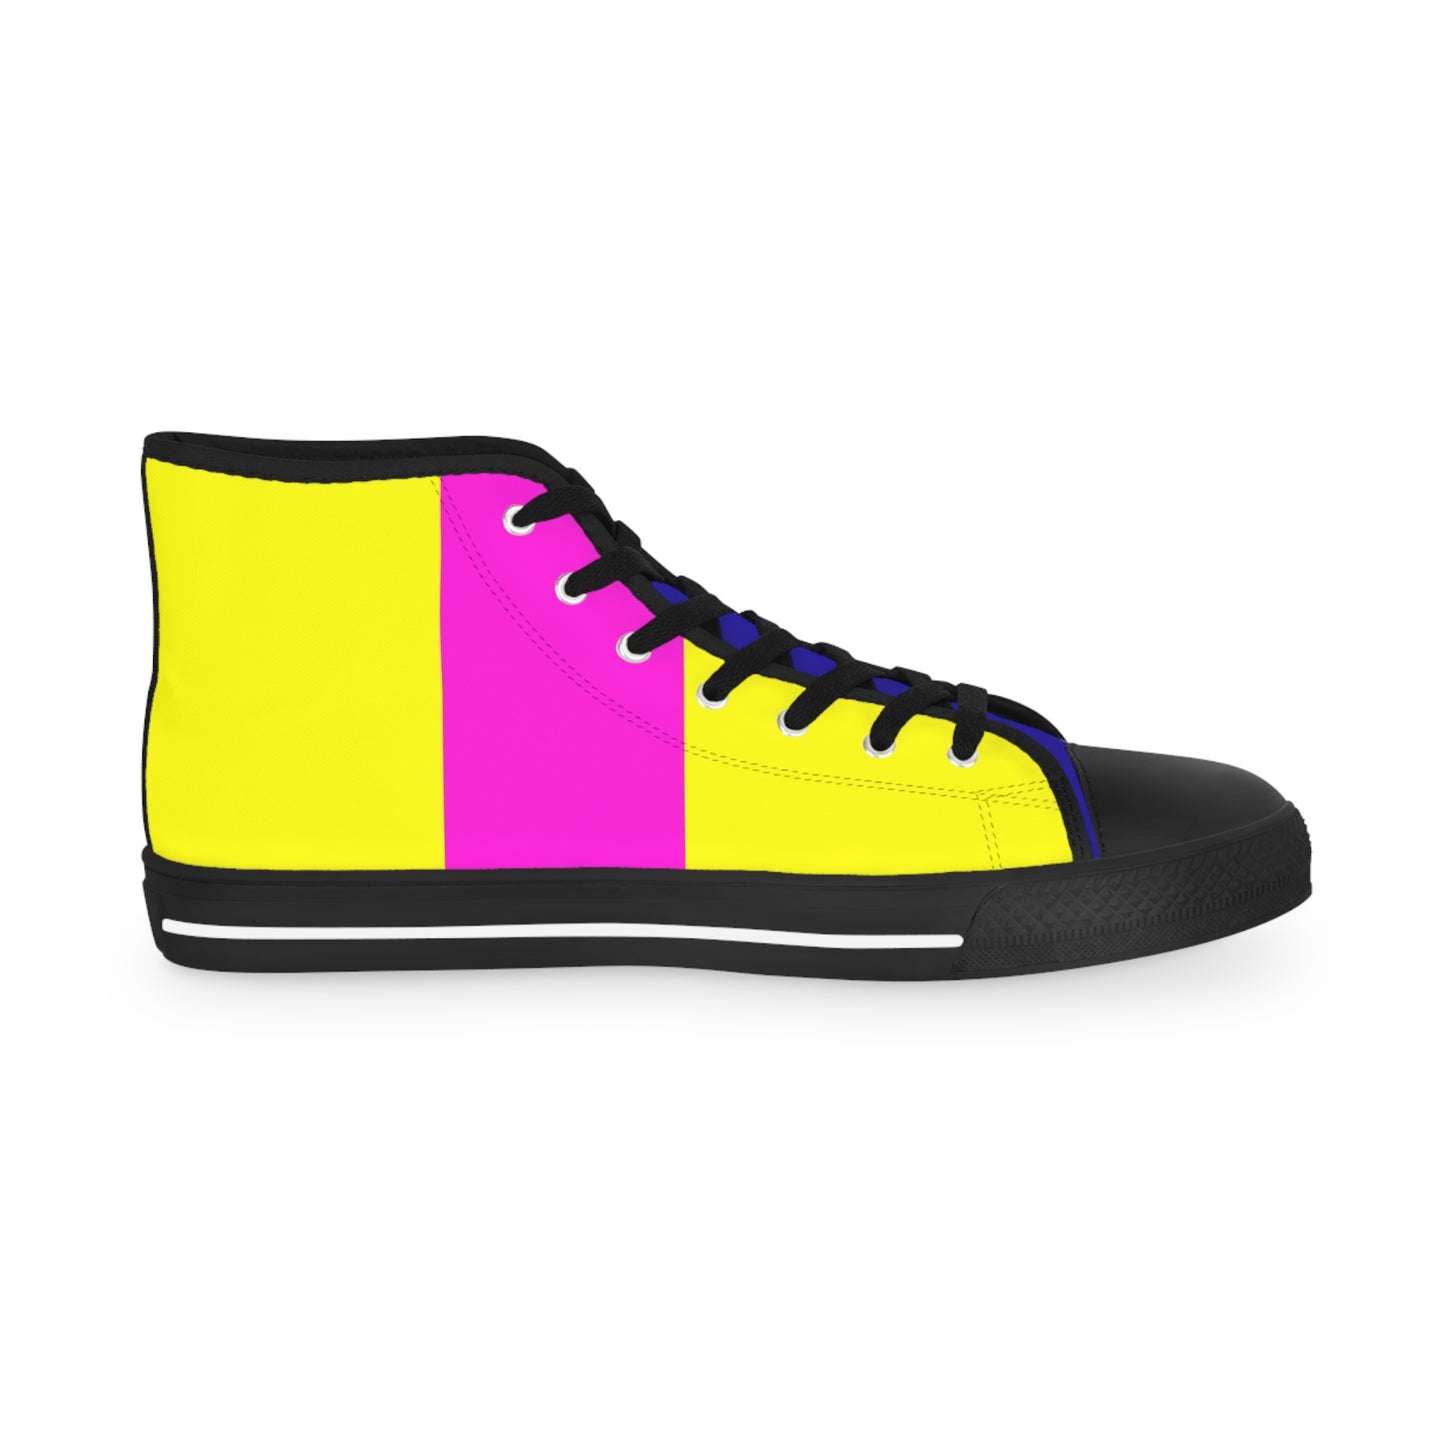 Limited Edition High Top Sneakers - 1